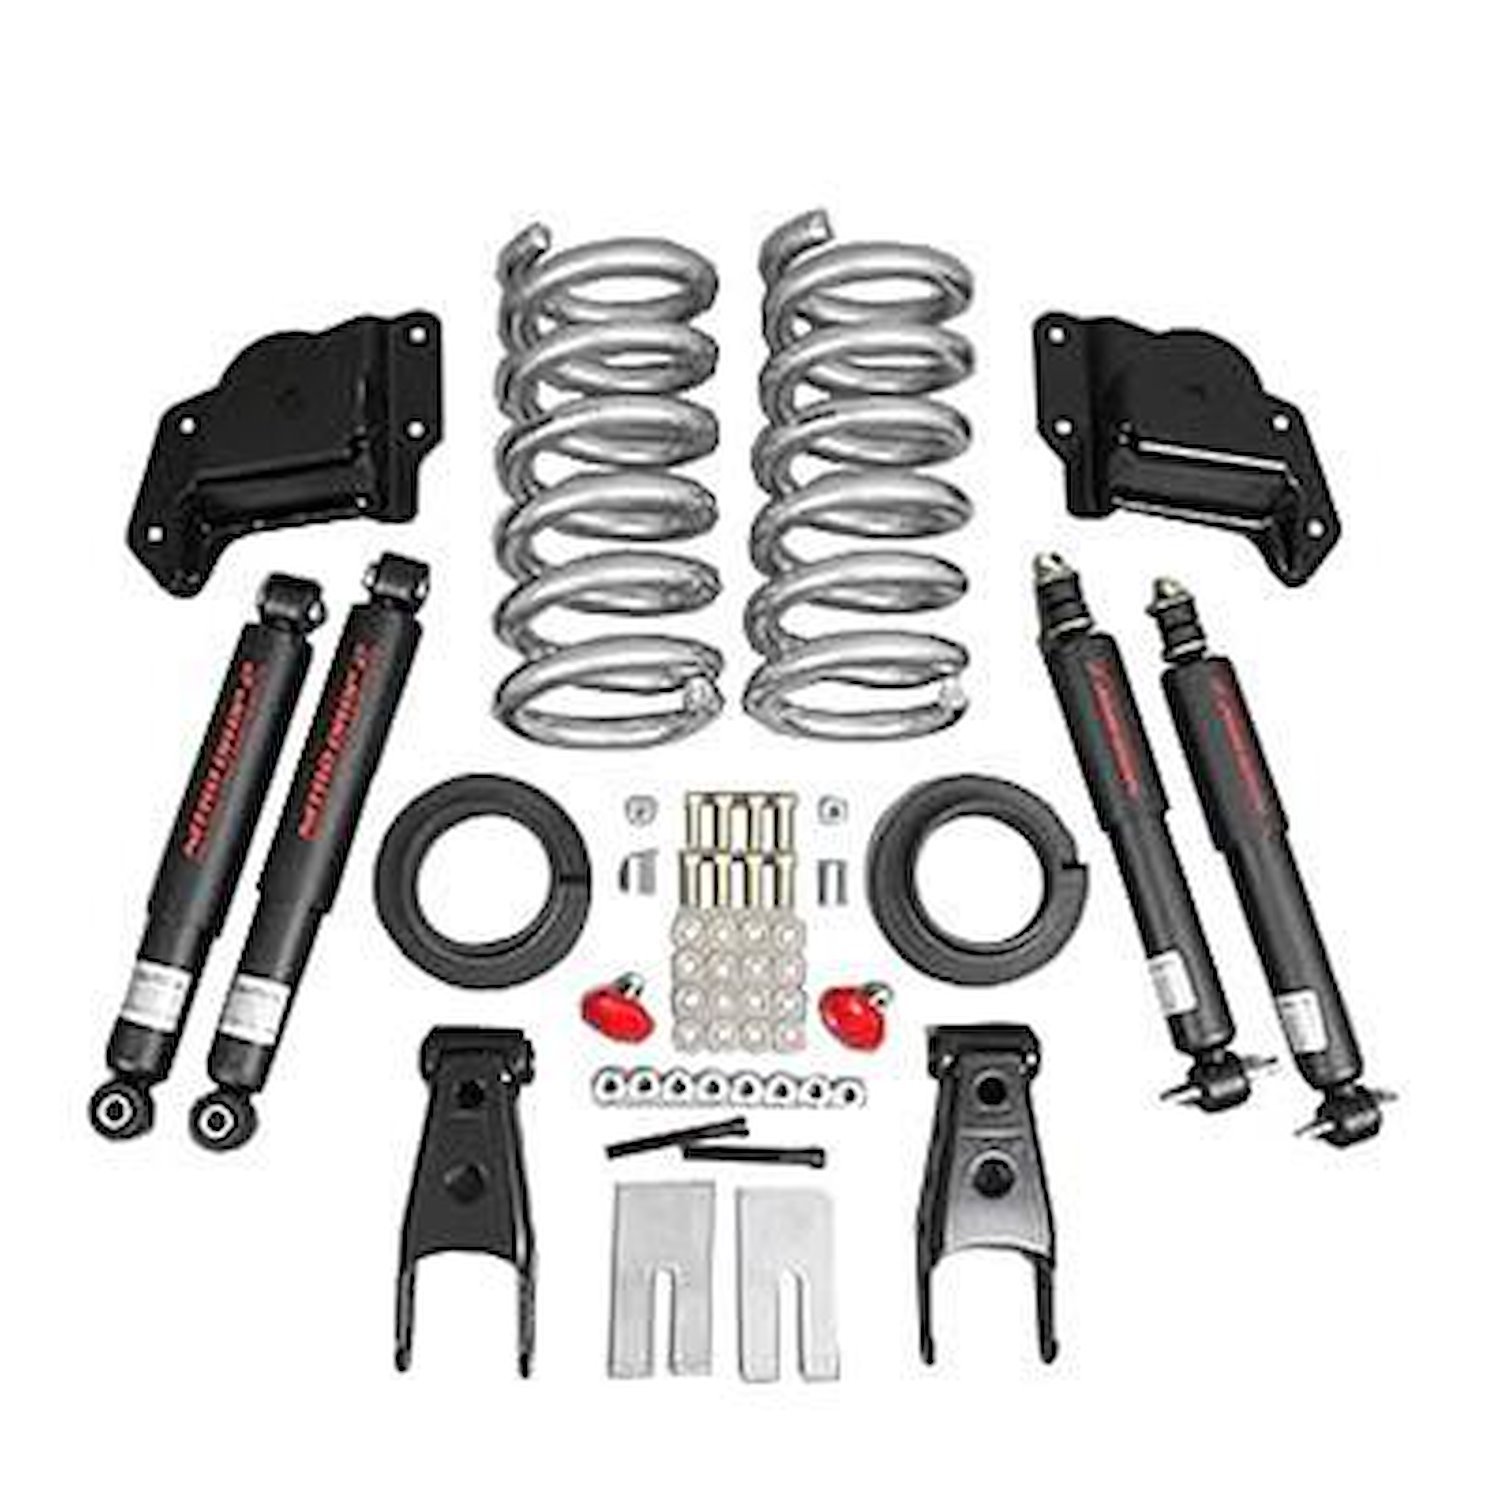 Complete Lowering Kit for 1973-1987 Chevy Blazer/GMC Jimmy